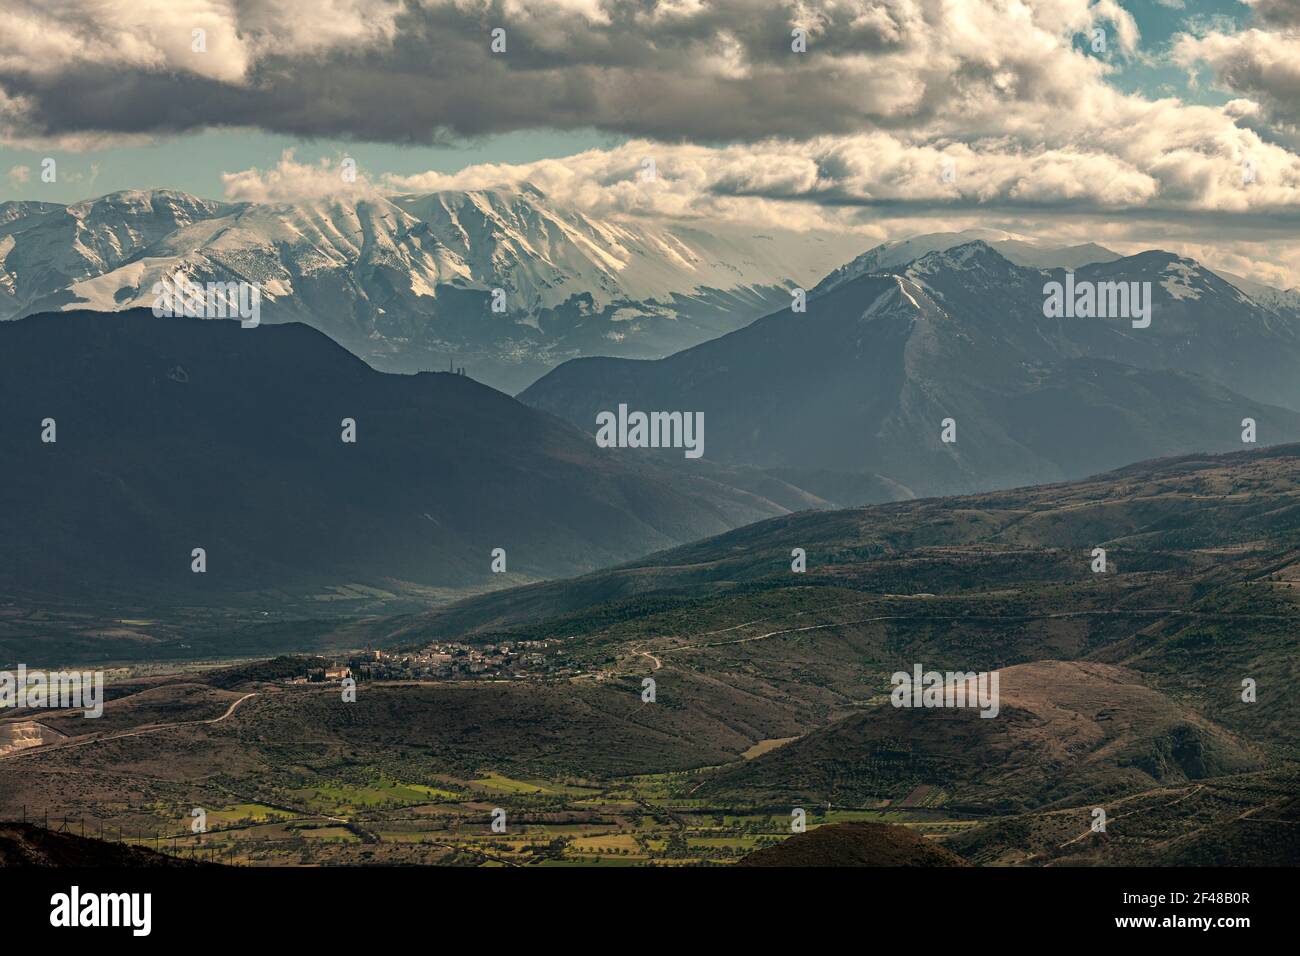 Top view of the Tirino valley in Abruzzo. In the background, the snow-capped mountains of the Morrone and Maiella. Abruzzo, Italy, Europe Stock Photo